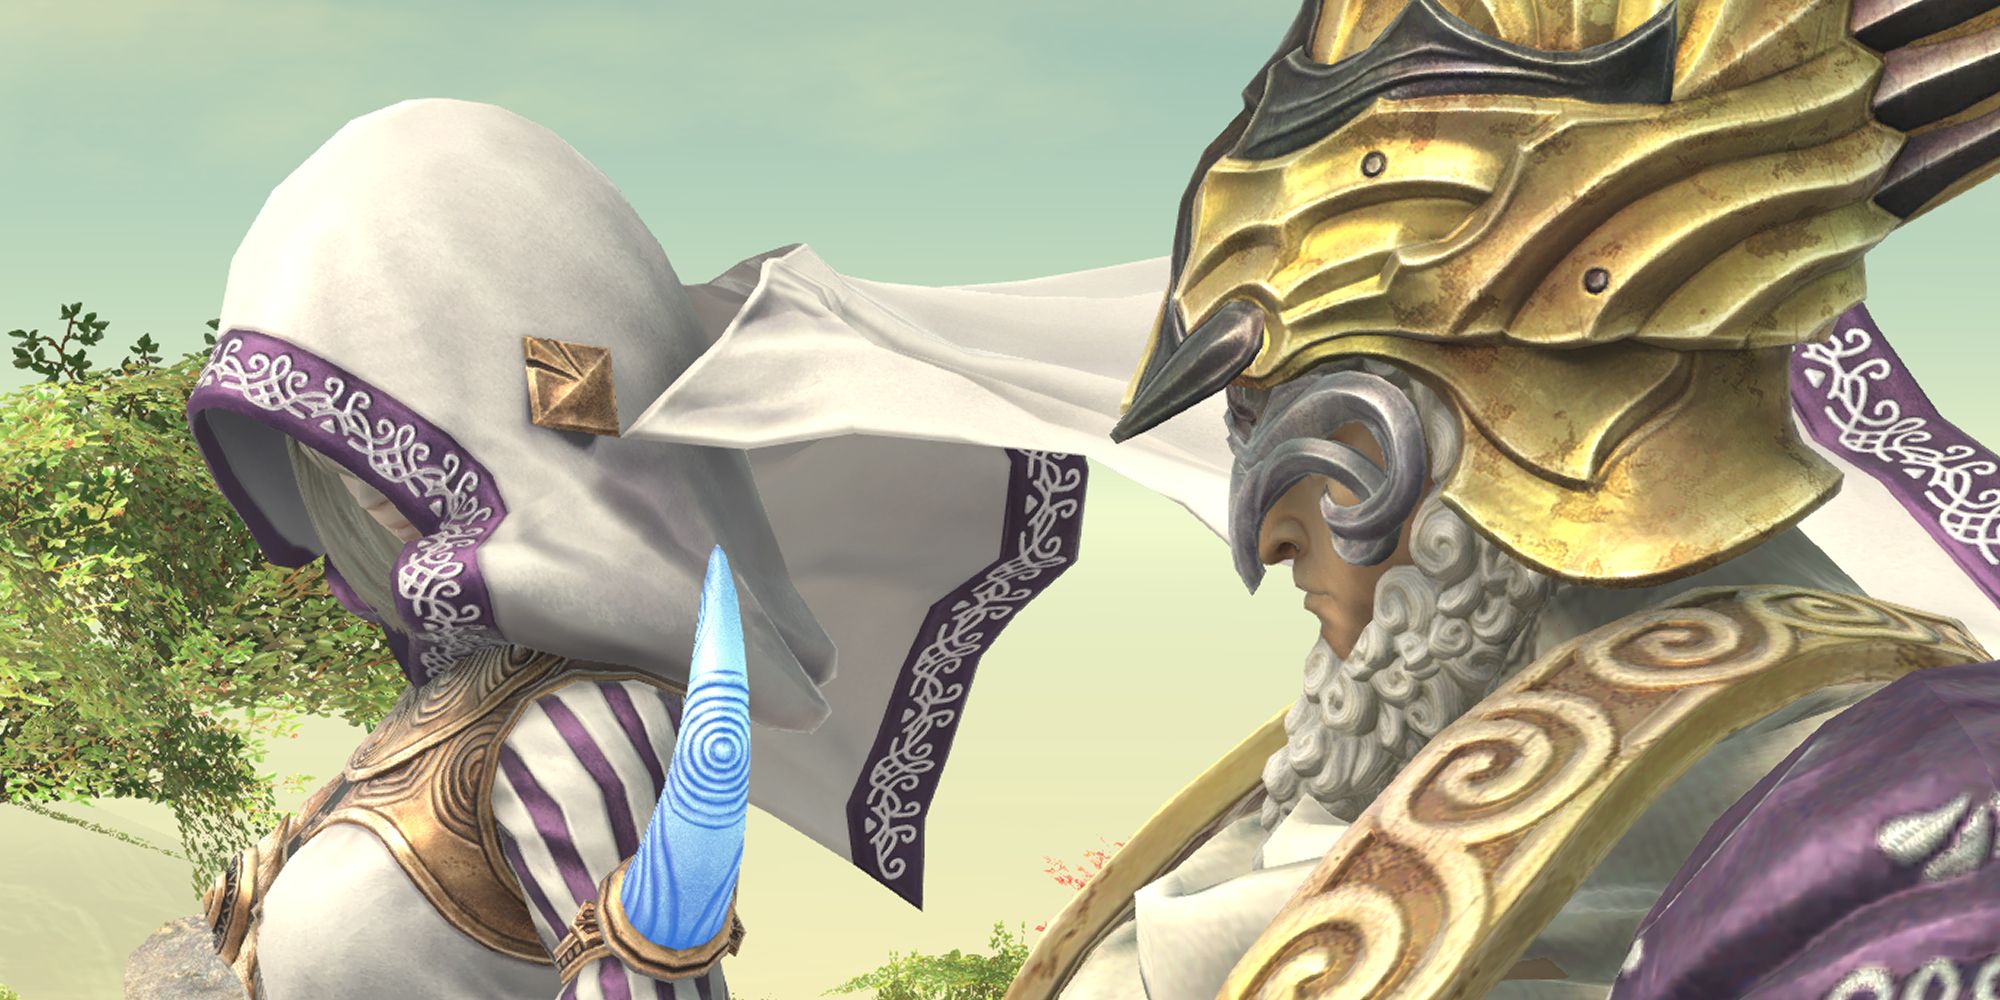 An image of Althyk and Nymeia, bosses from Final Fantasy 14.